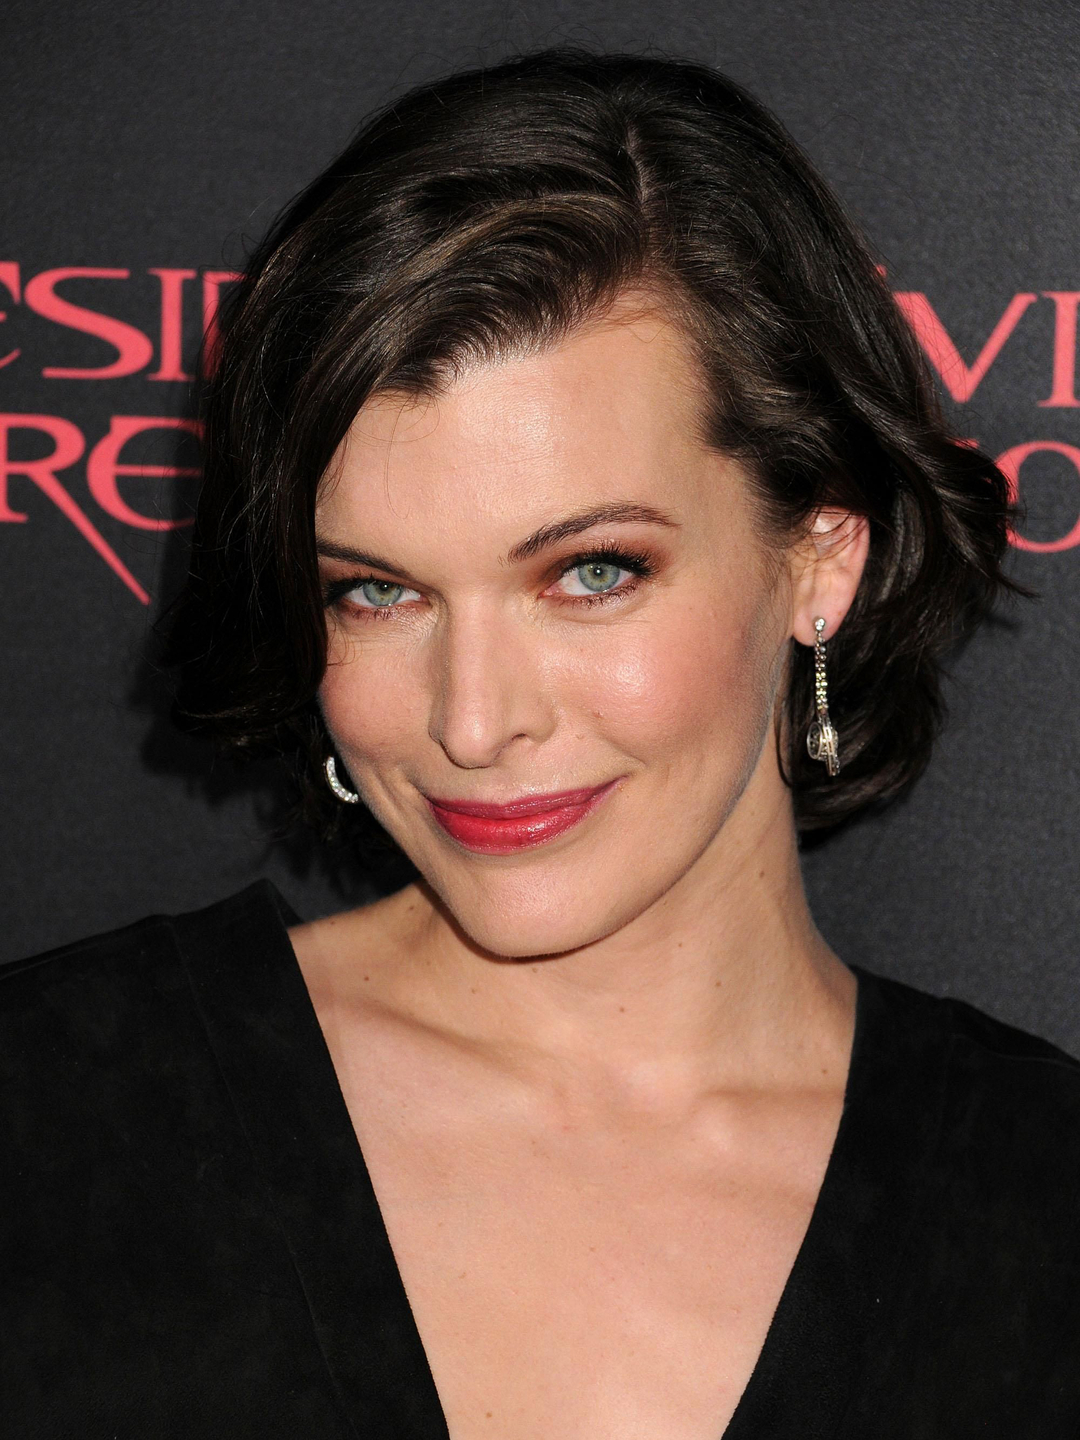 Milla Jovovich how did she became famous